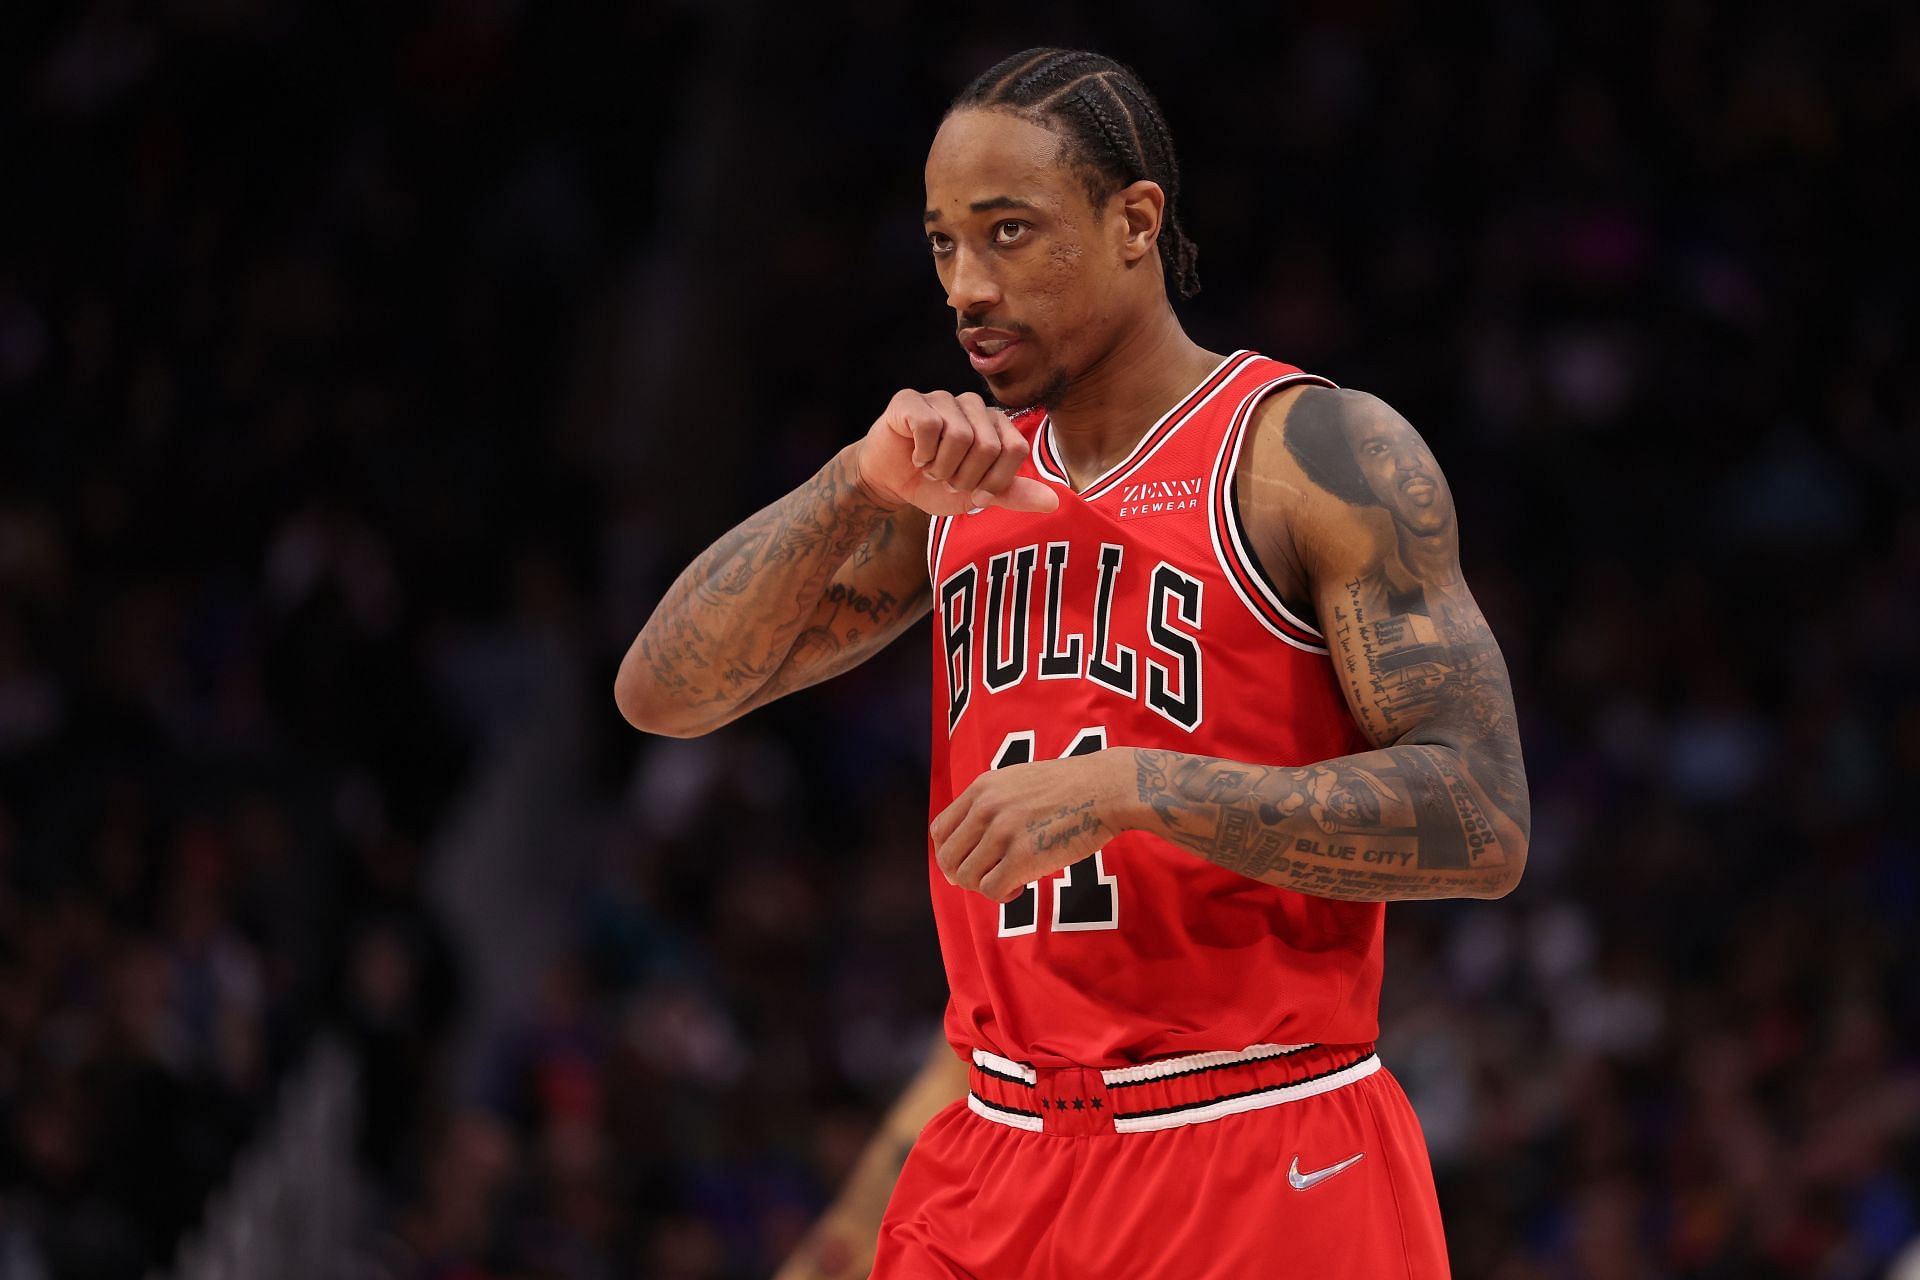 DeMar DeRozan will look to bring his best for the Chicago Bulls against the Bucks